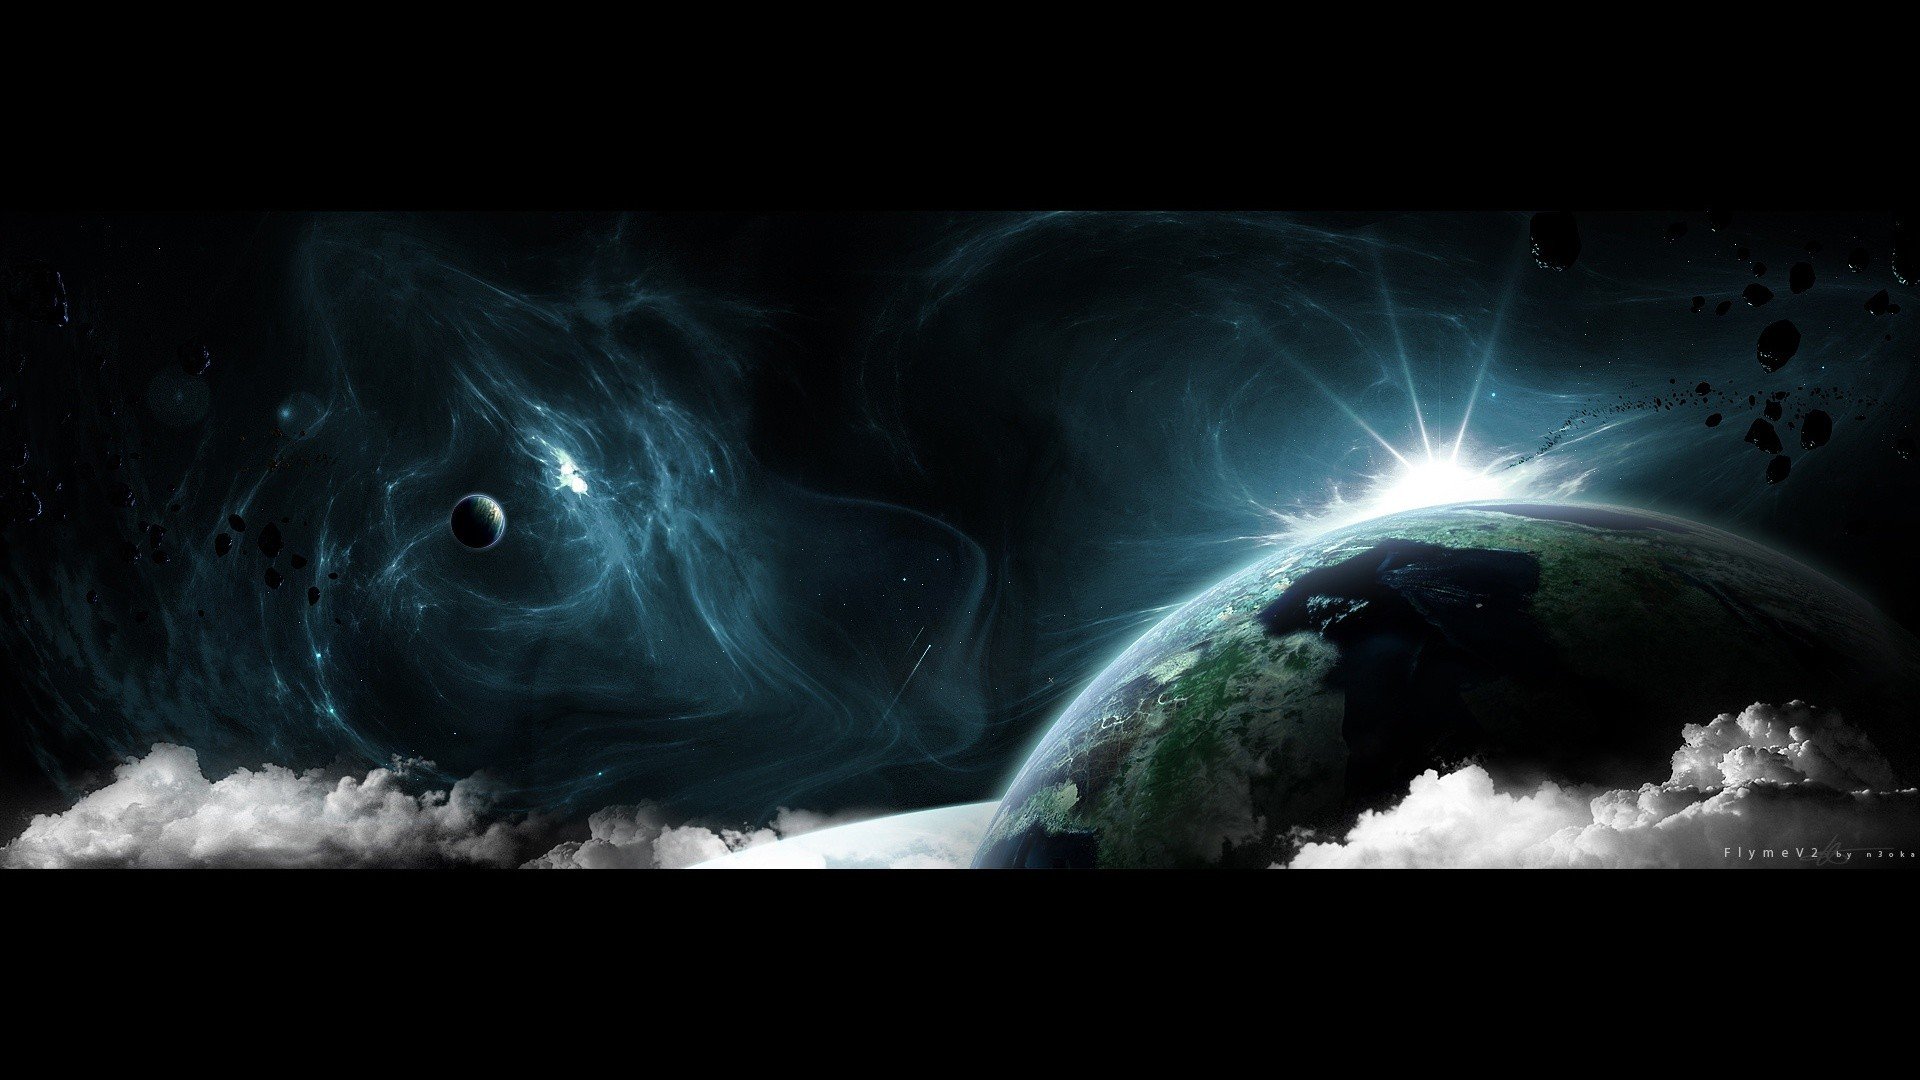 Outer space planets nebulae surreal asteroids wallpaper 1920x1080 1920x1080